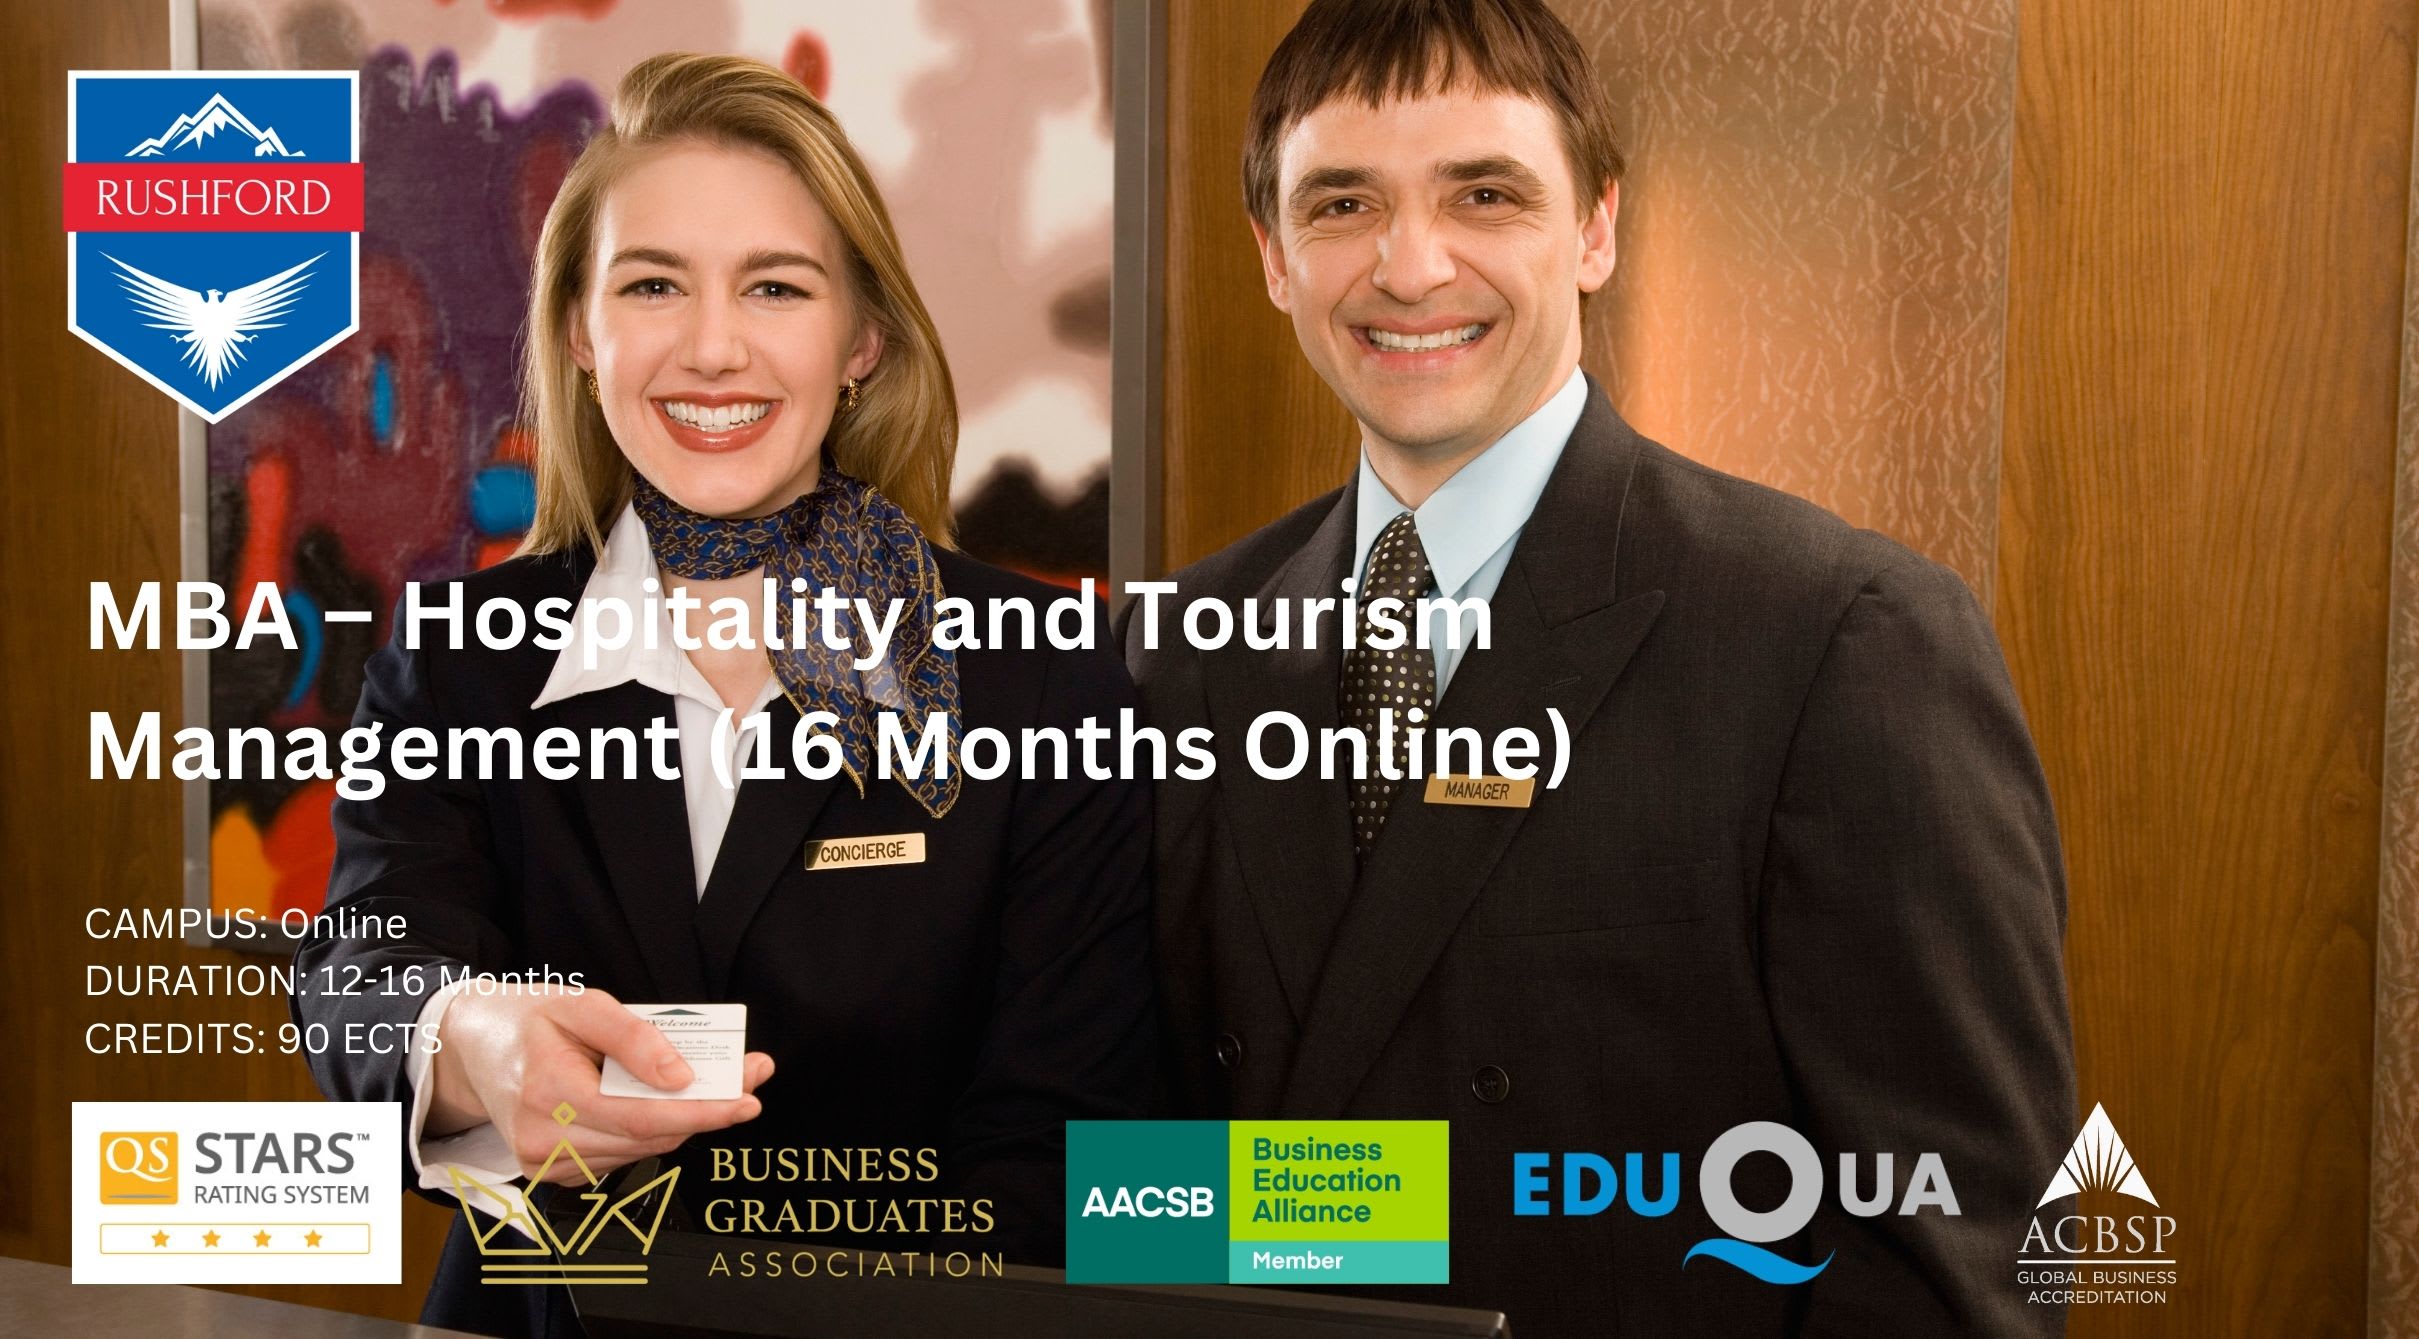 MBA – Hospitality and Tourism Management (16 Months Online)